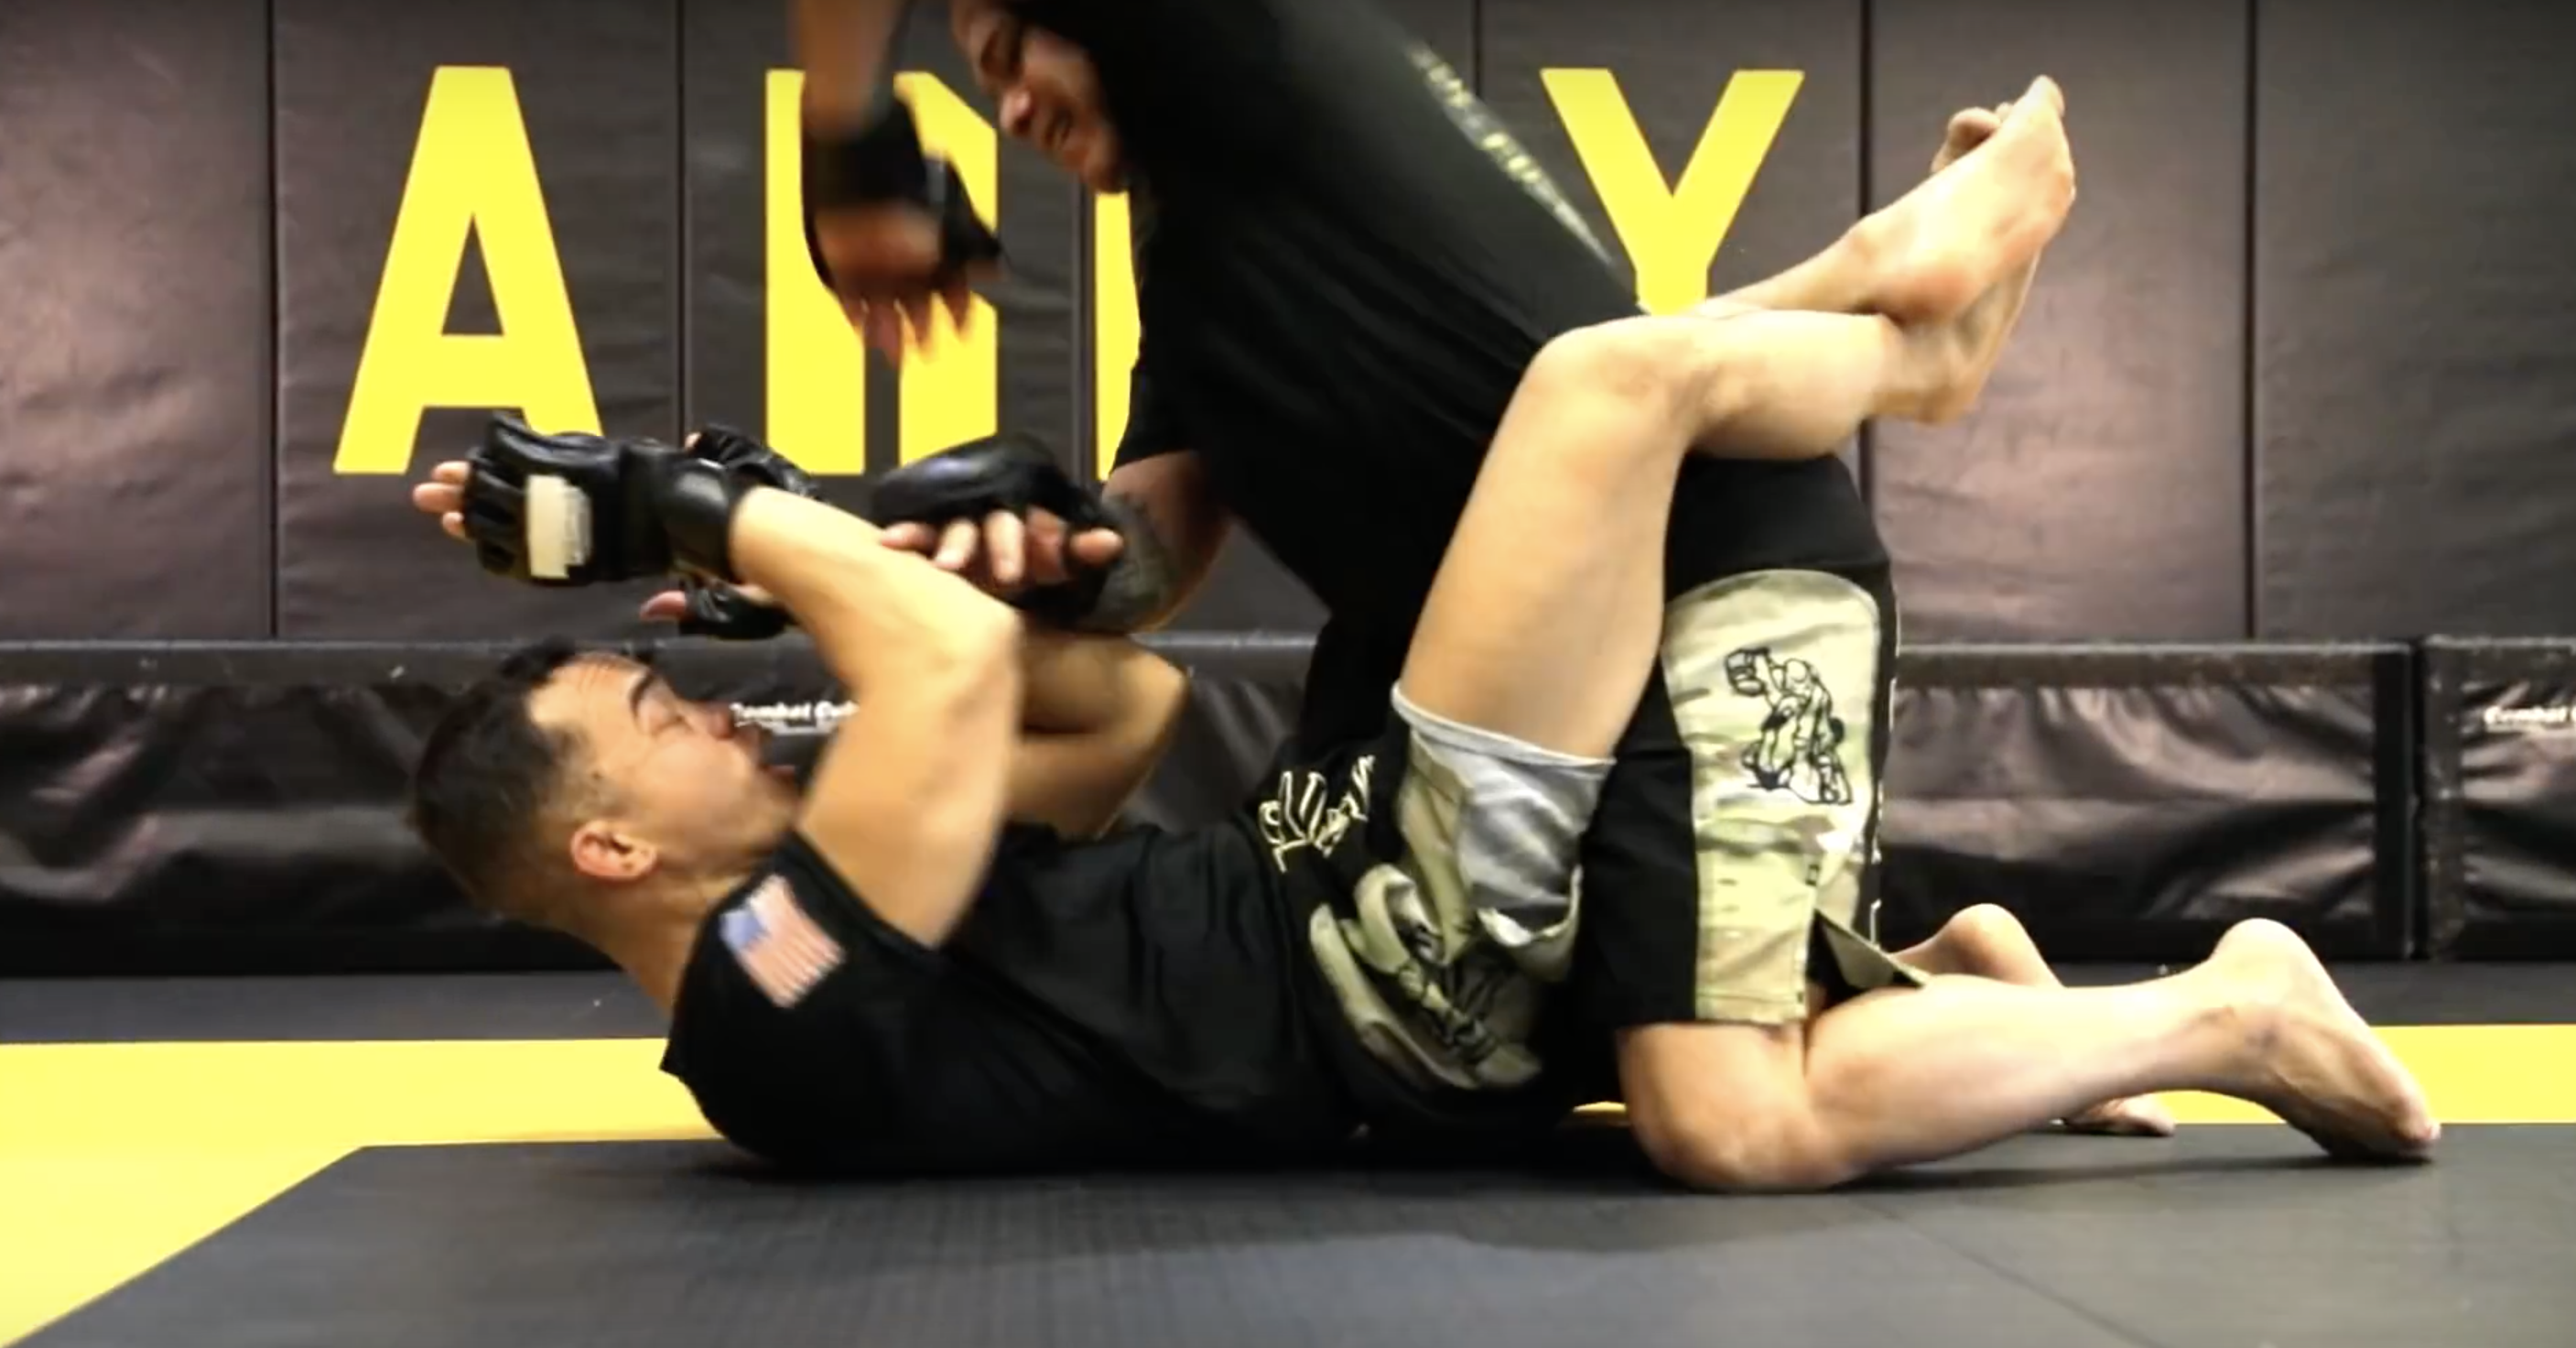 Two MMA fighters grappling on the mat